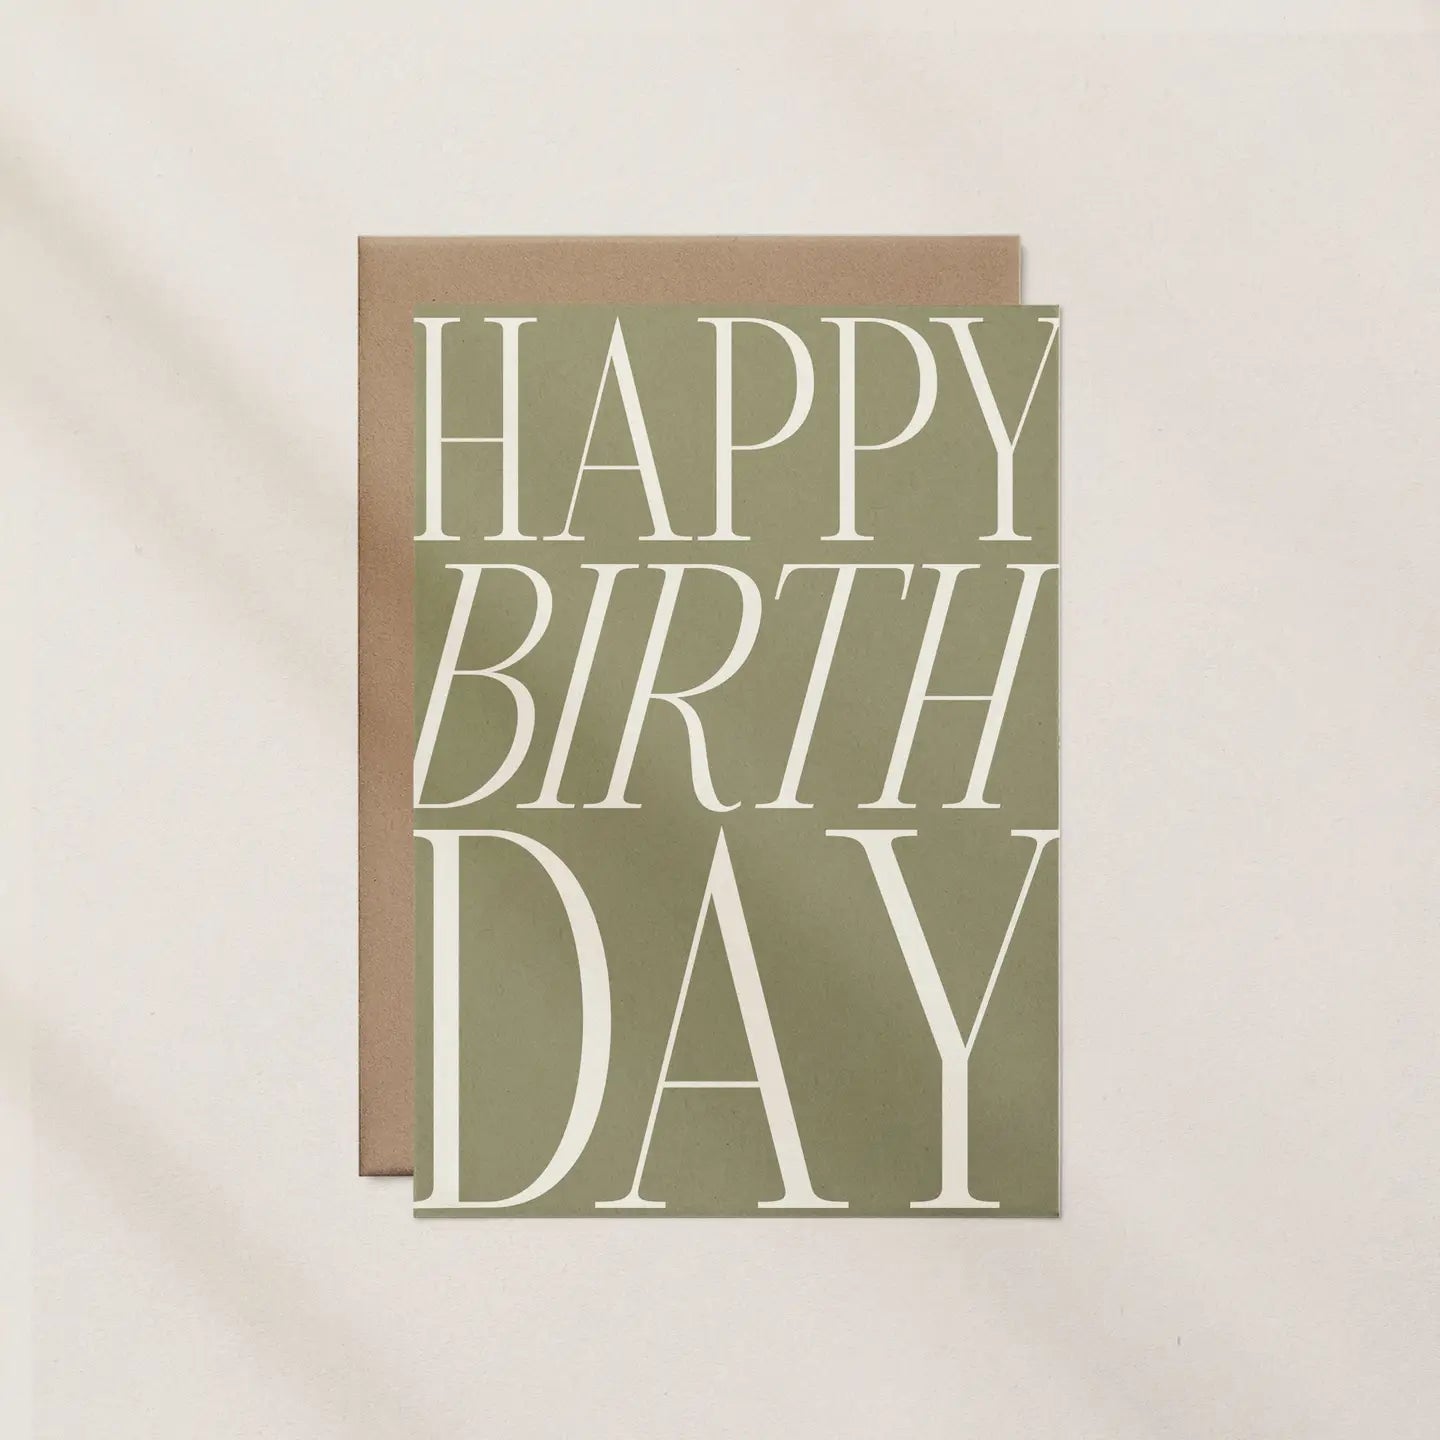 Happy Birthday Typography Card - Green and White